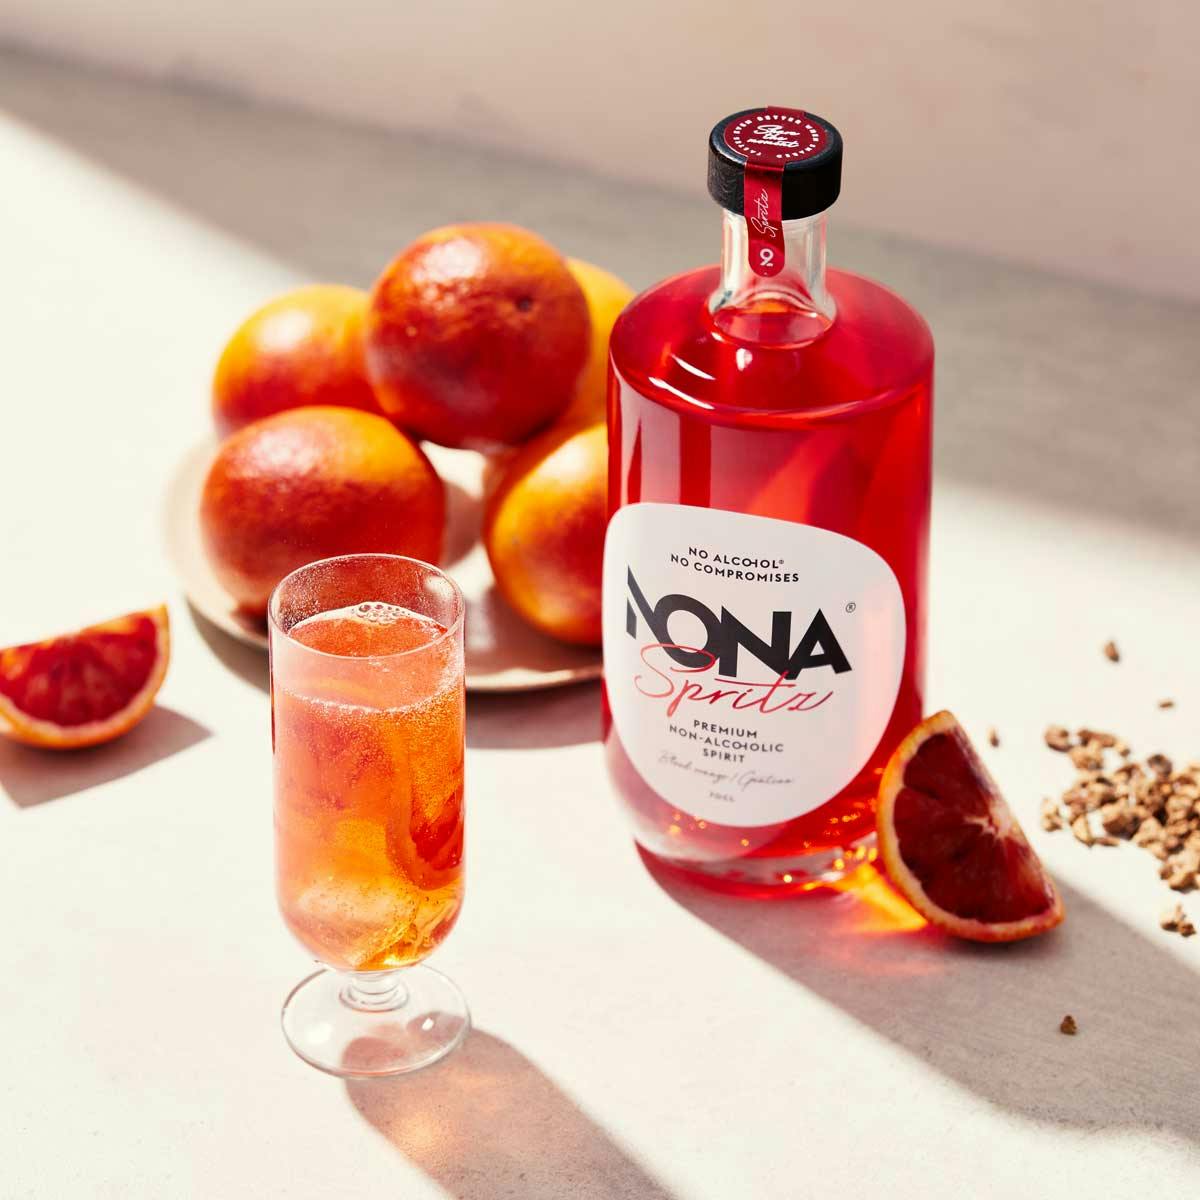 Bottle of non-alcoholic spritz by Nona and glass with non-alcoholic spritz with pomegranets